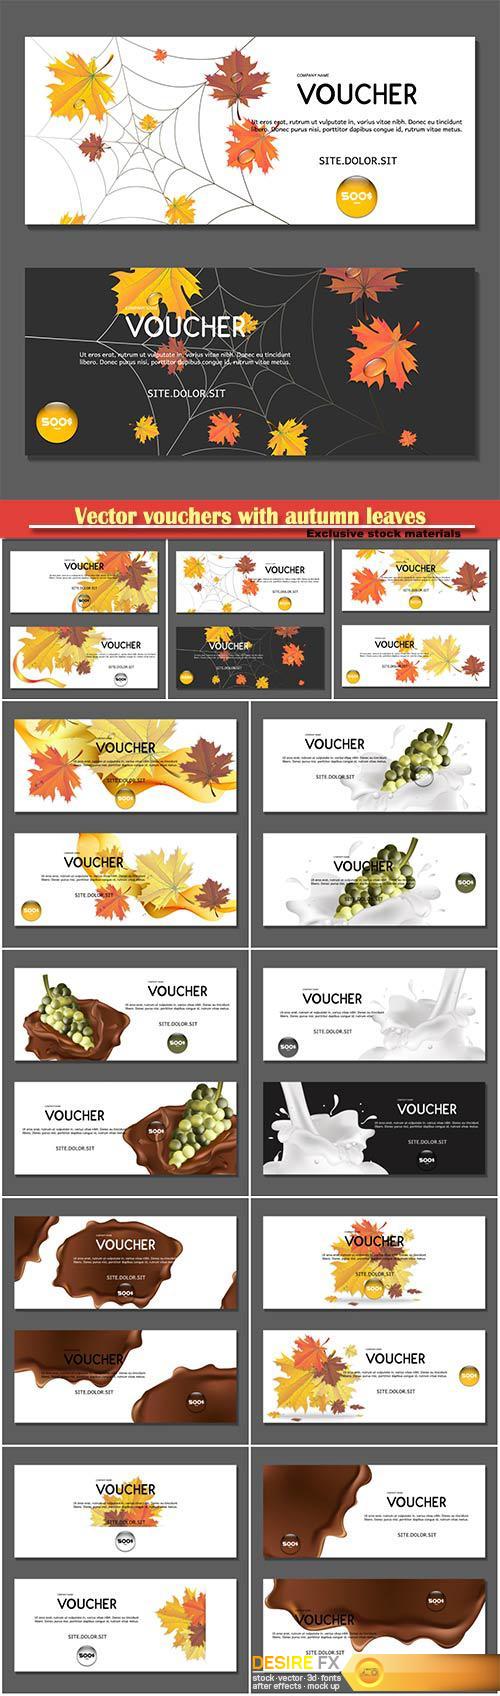 Vector vouchers with autumn leaves and grapes